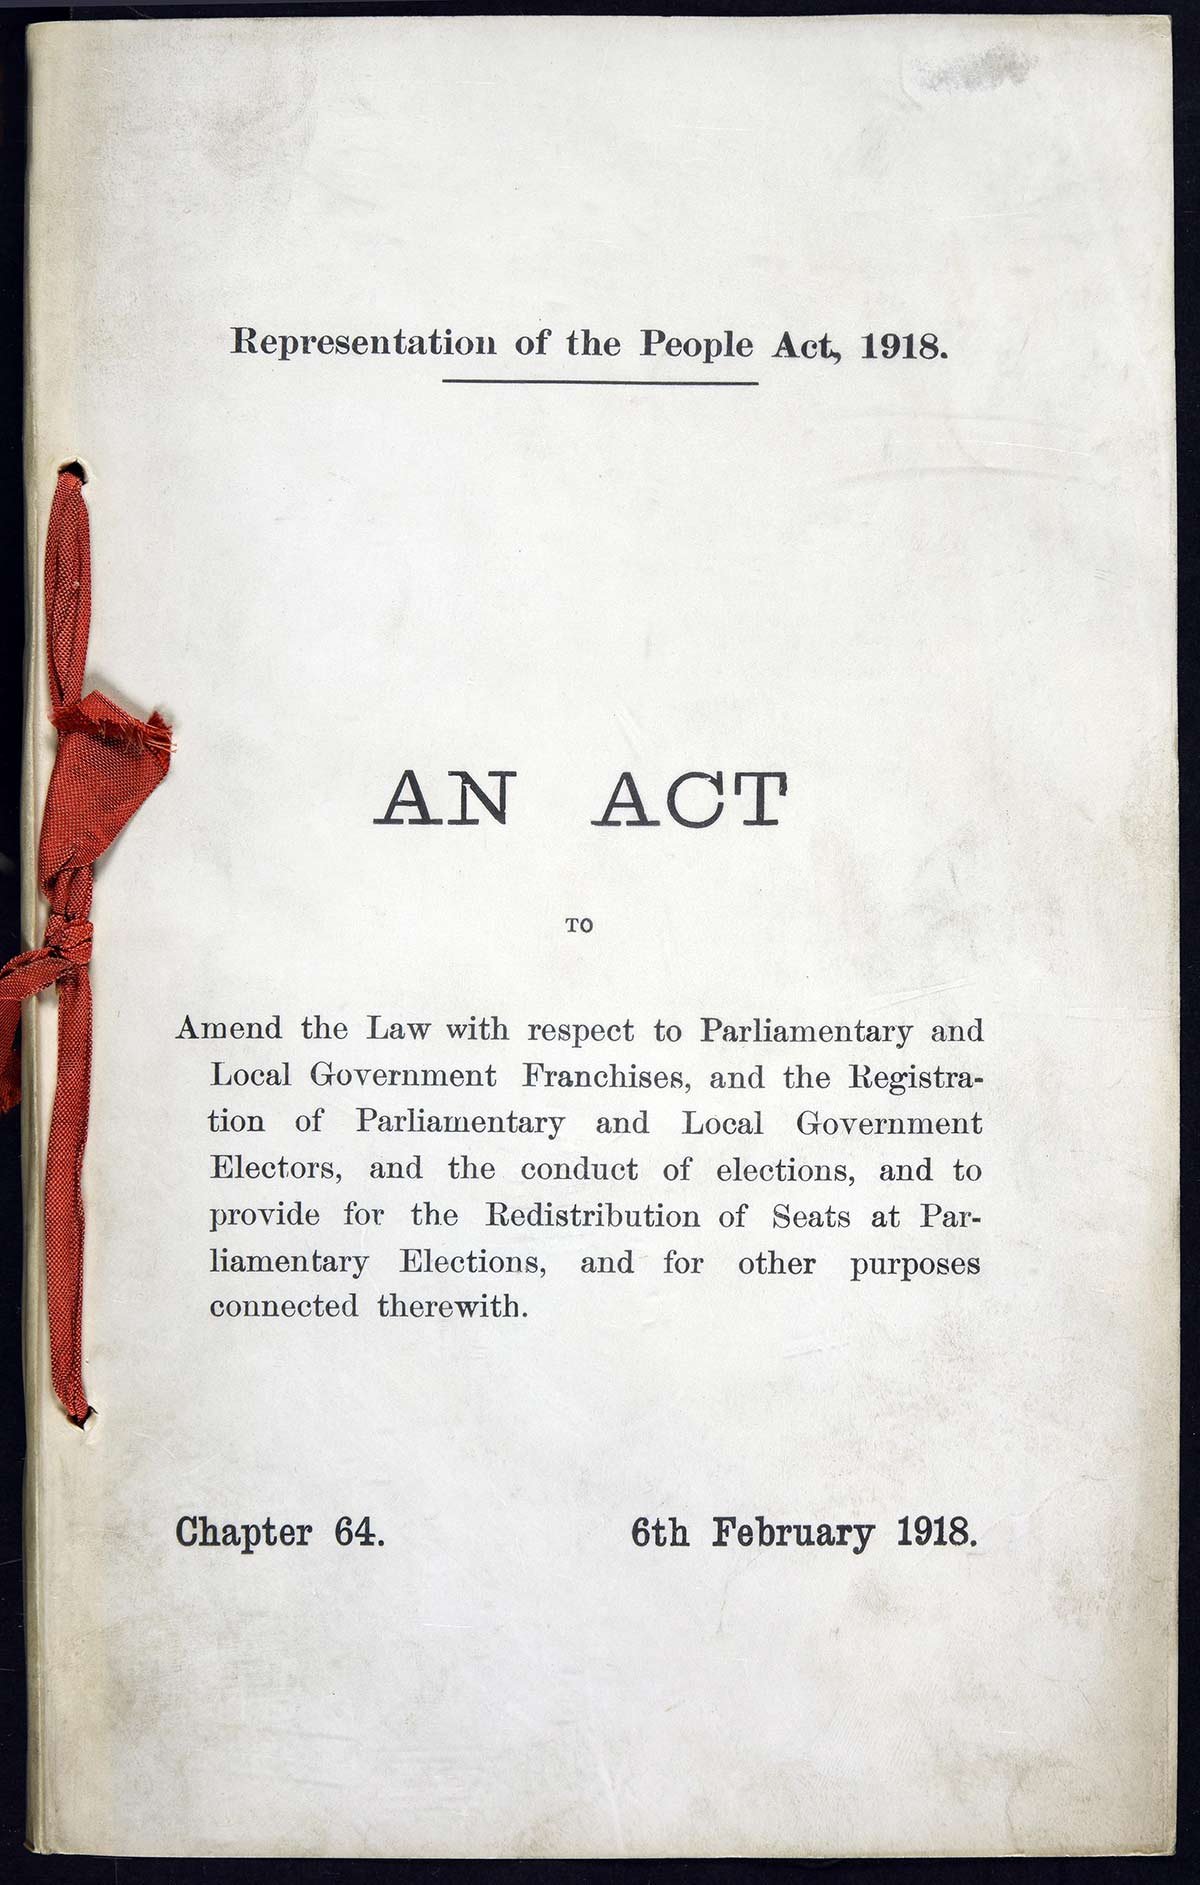 A front cover for 'An Act' document with red binding.